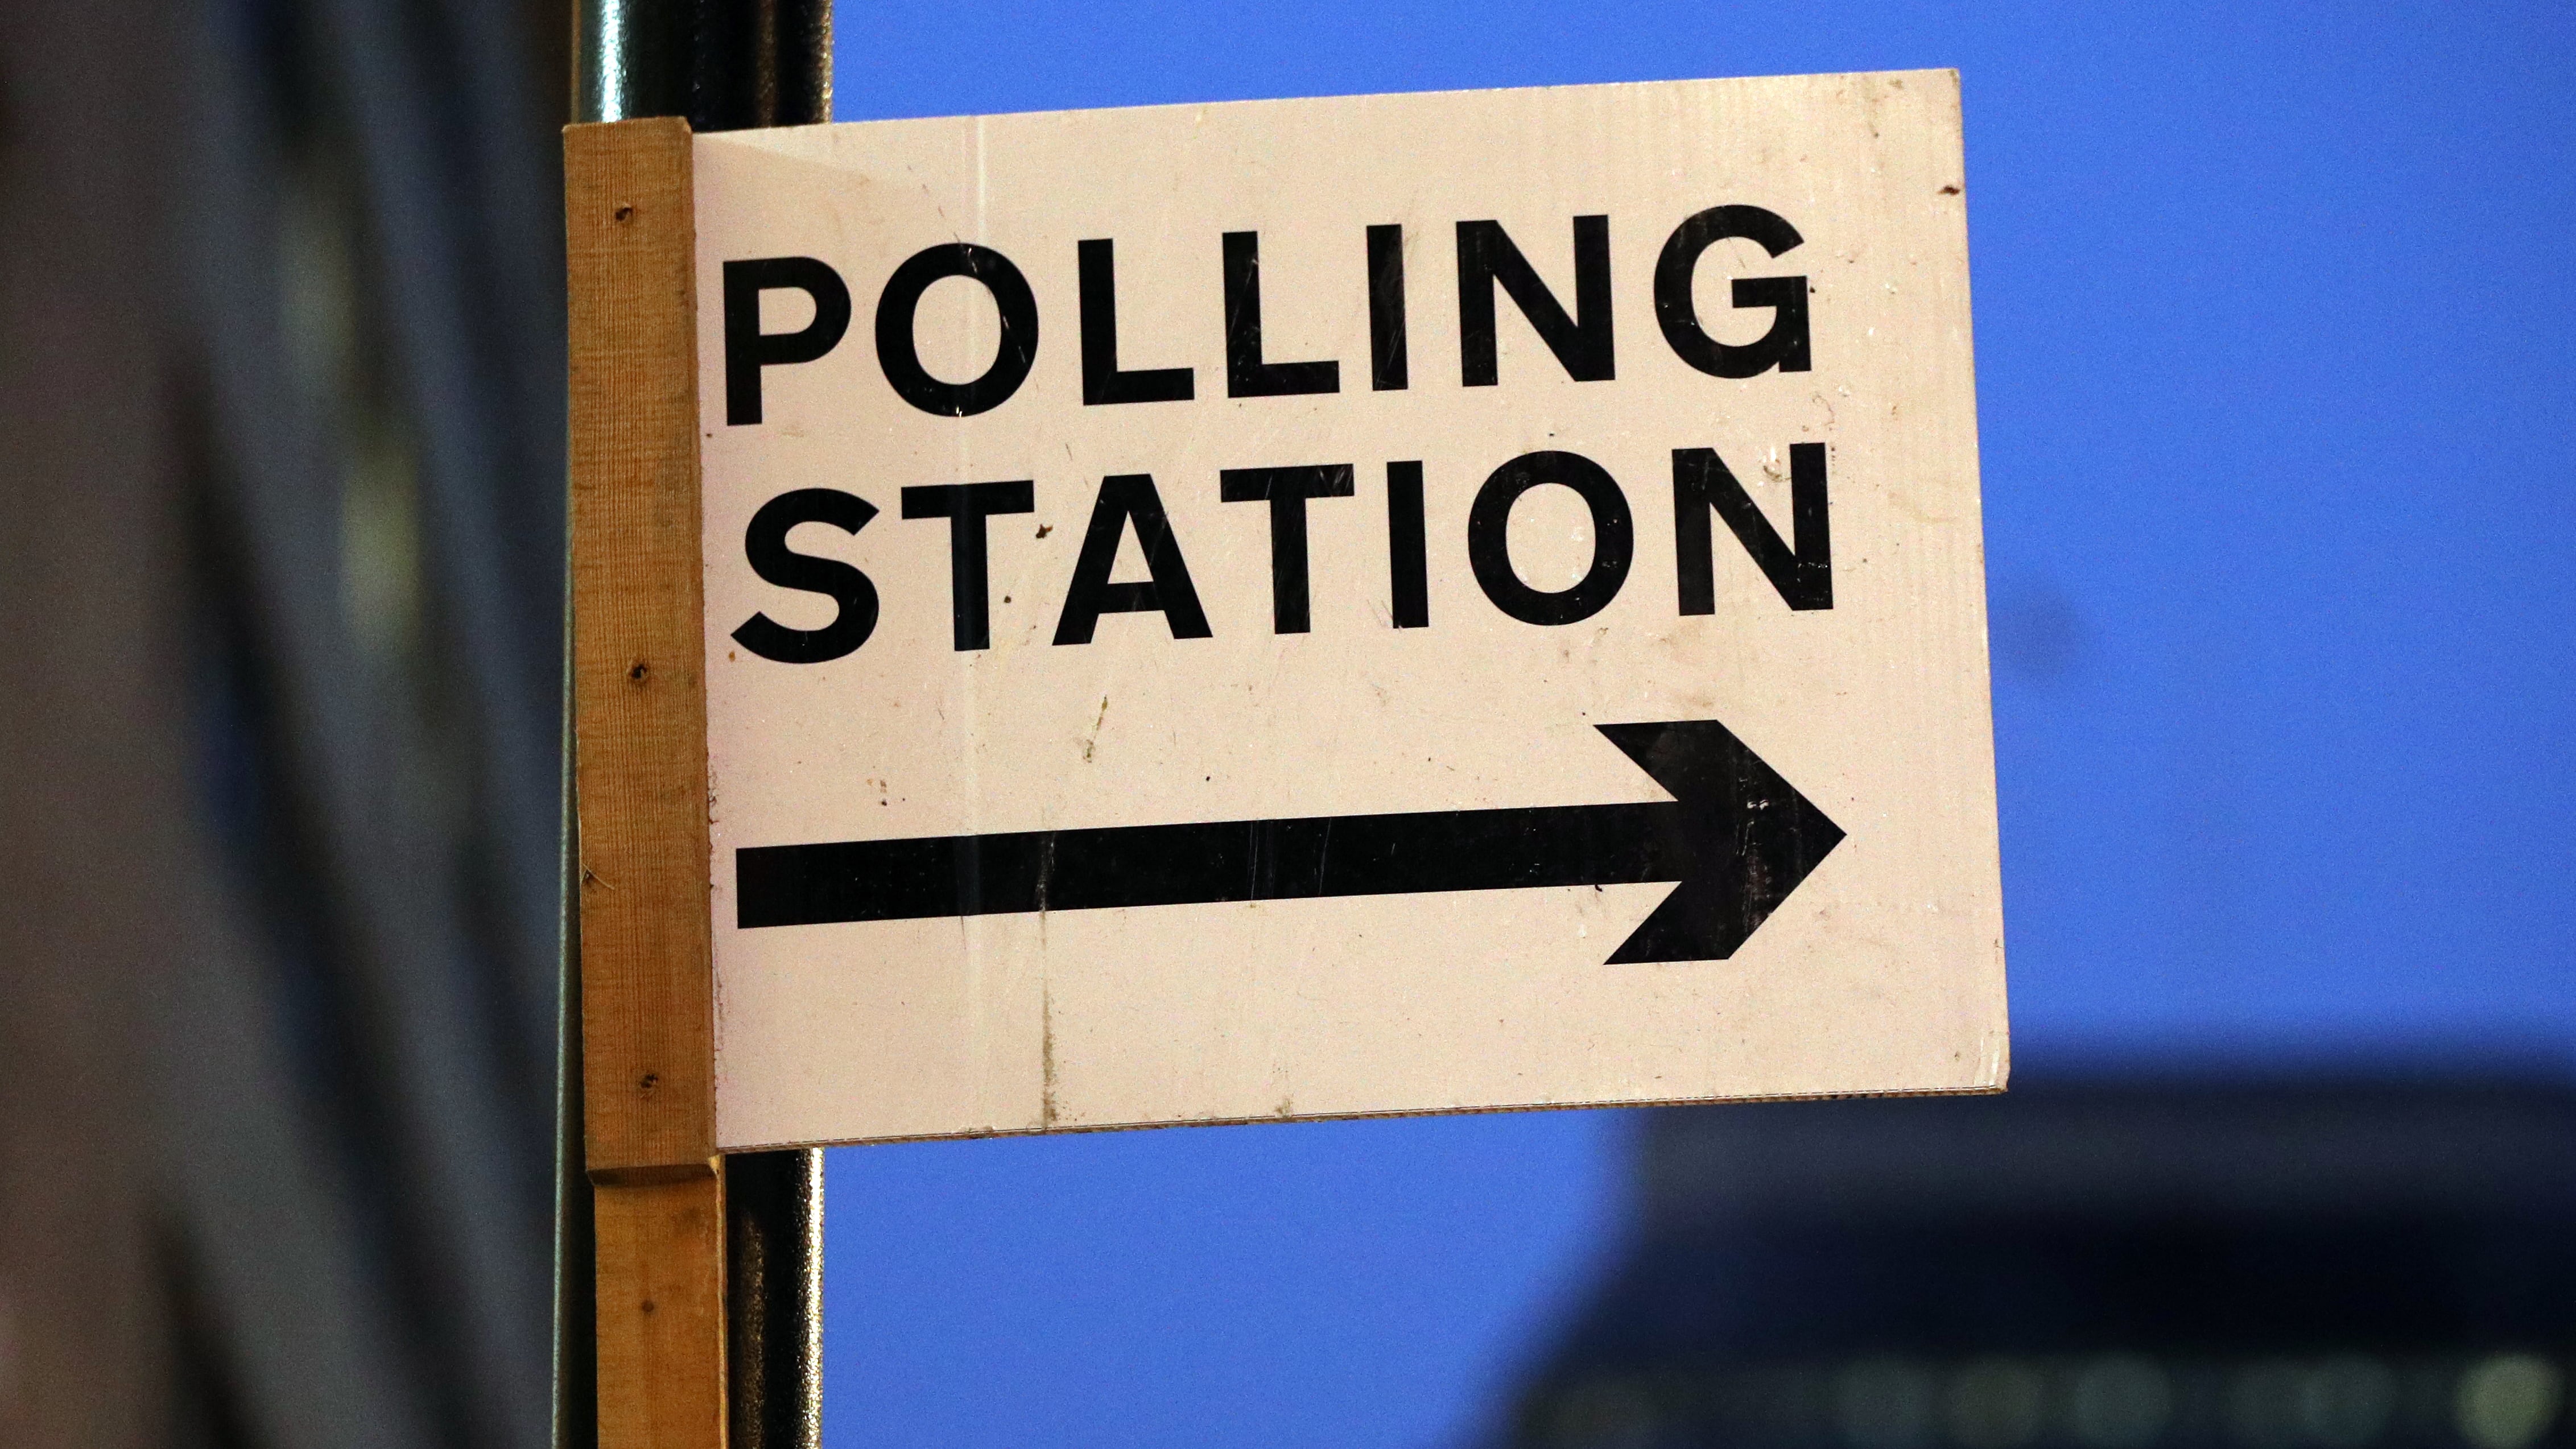 The outcome of the general election will depend on the size of the swing from the Conservatives to Labour